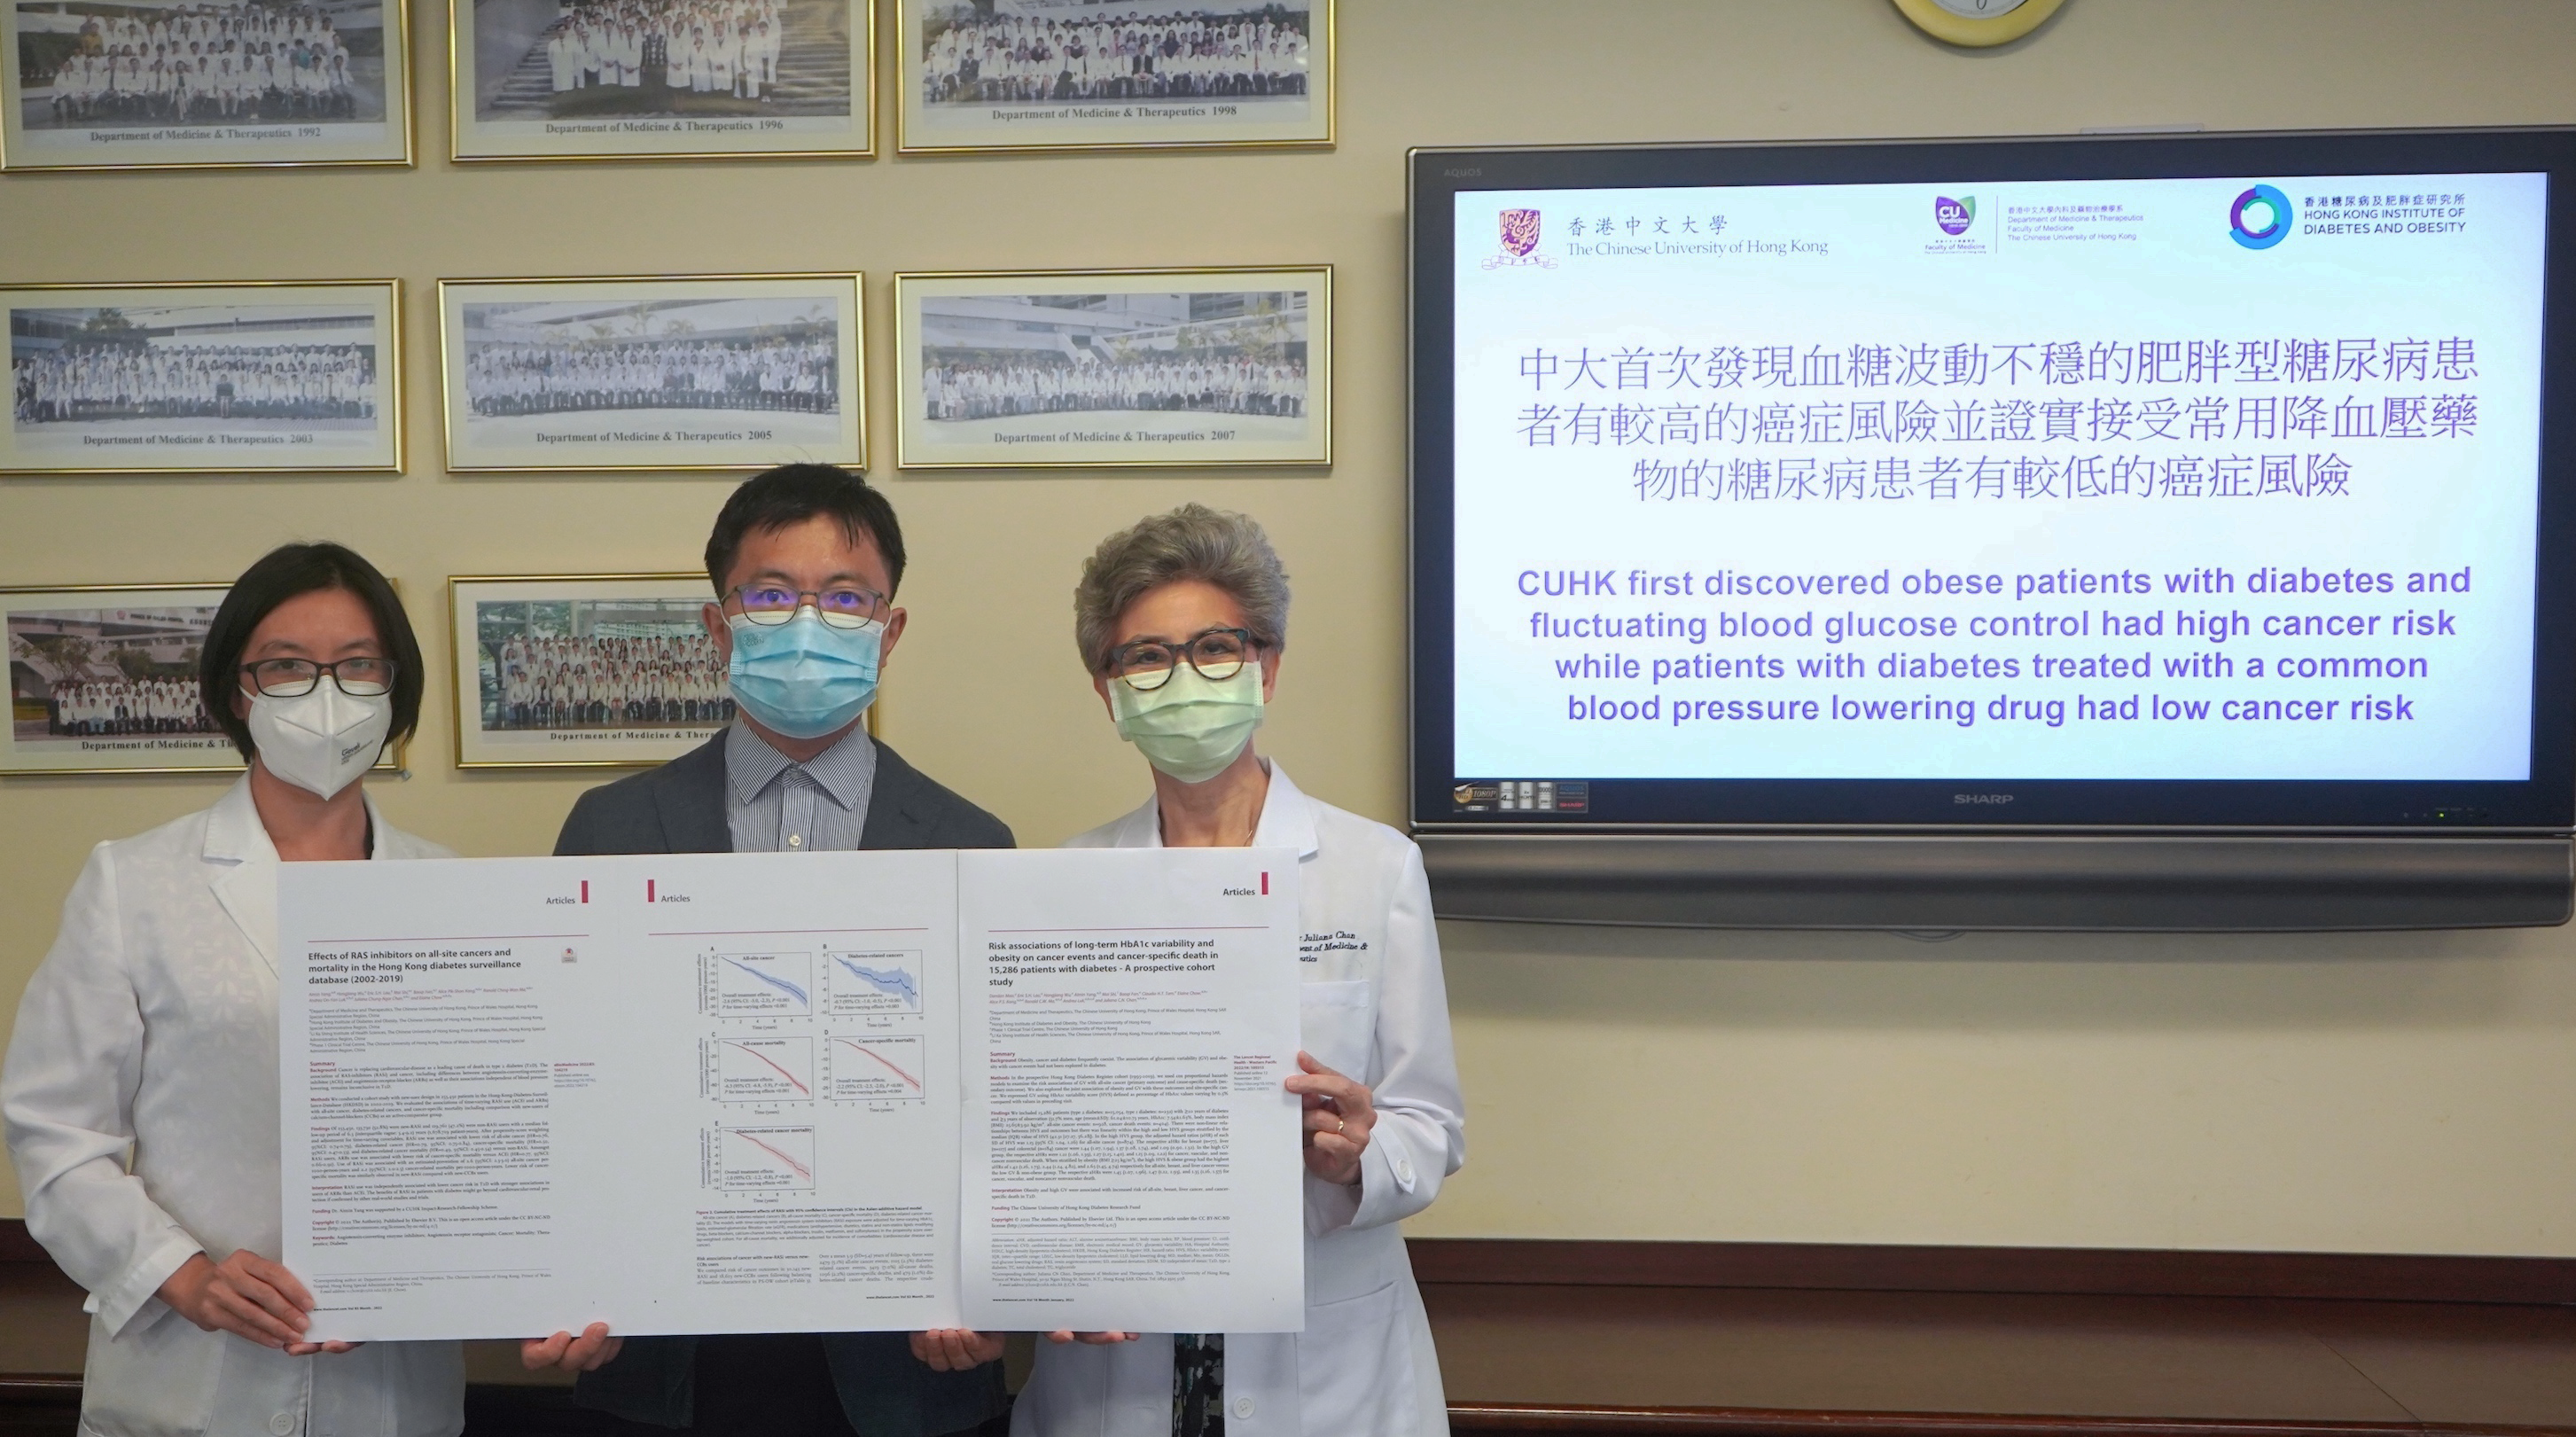 Research team members include (from right) Professor Juliana Chan, Chair Professor of Medicine and Therapeutics at CU Medicine and Director of the Hong Kong Institute of Diabetes and Obesity; Dr Aimin Yang, Research Assistant Professor and Dr Elaine Chow, Assistant Professor in the Department of Medicine and Therapeutics at CU Medicine. 